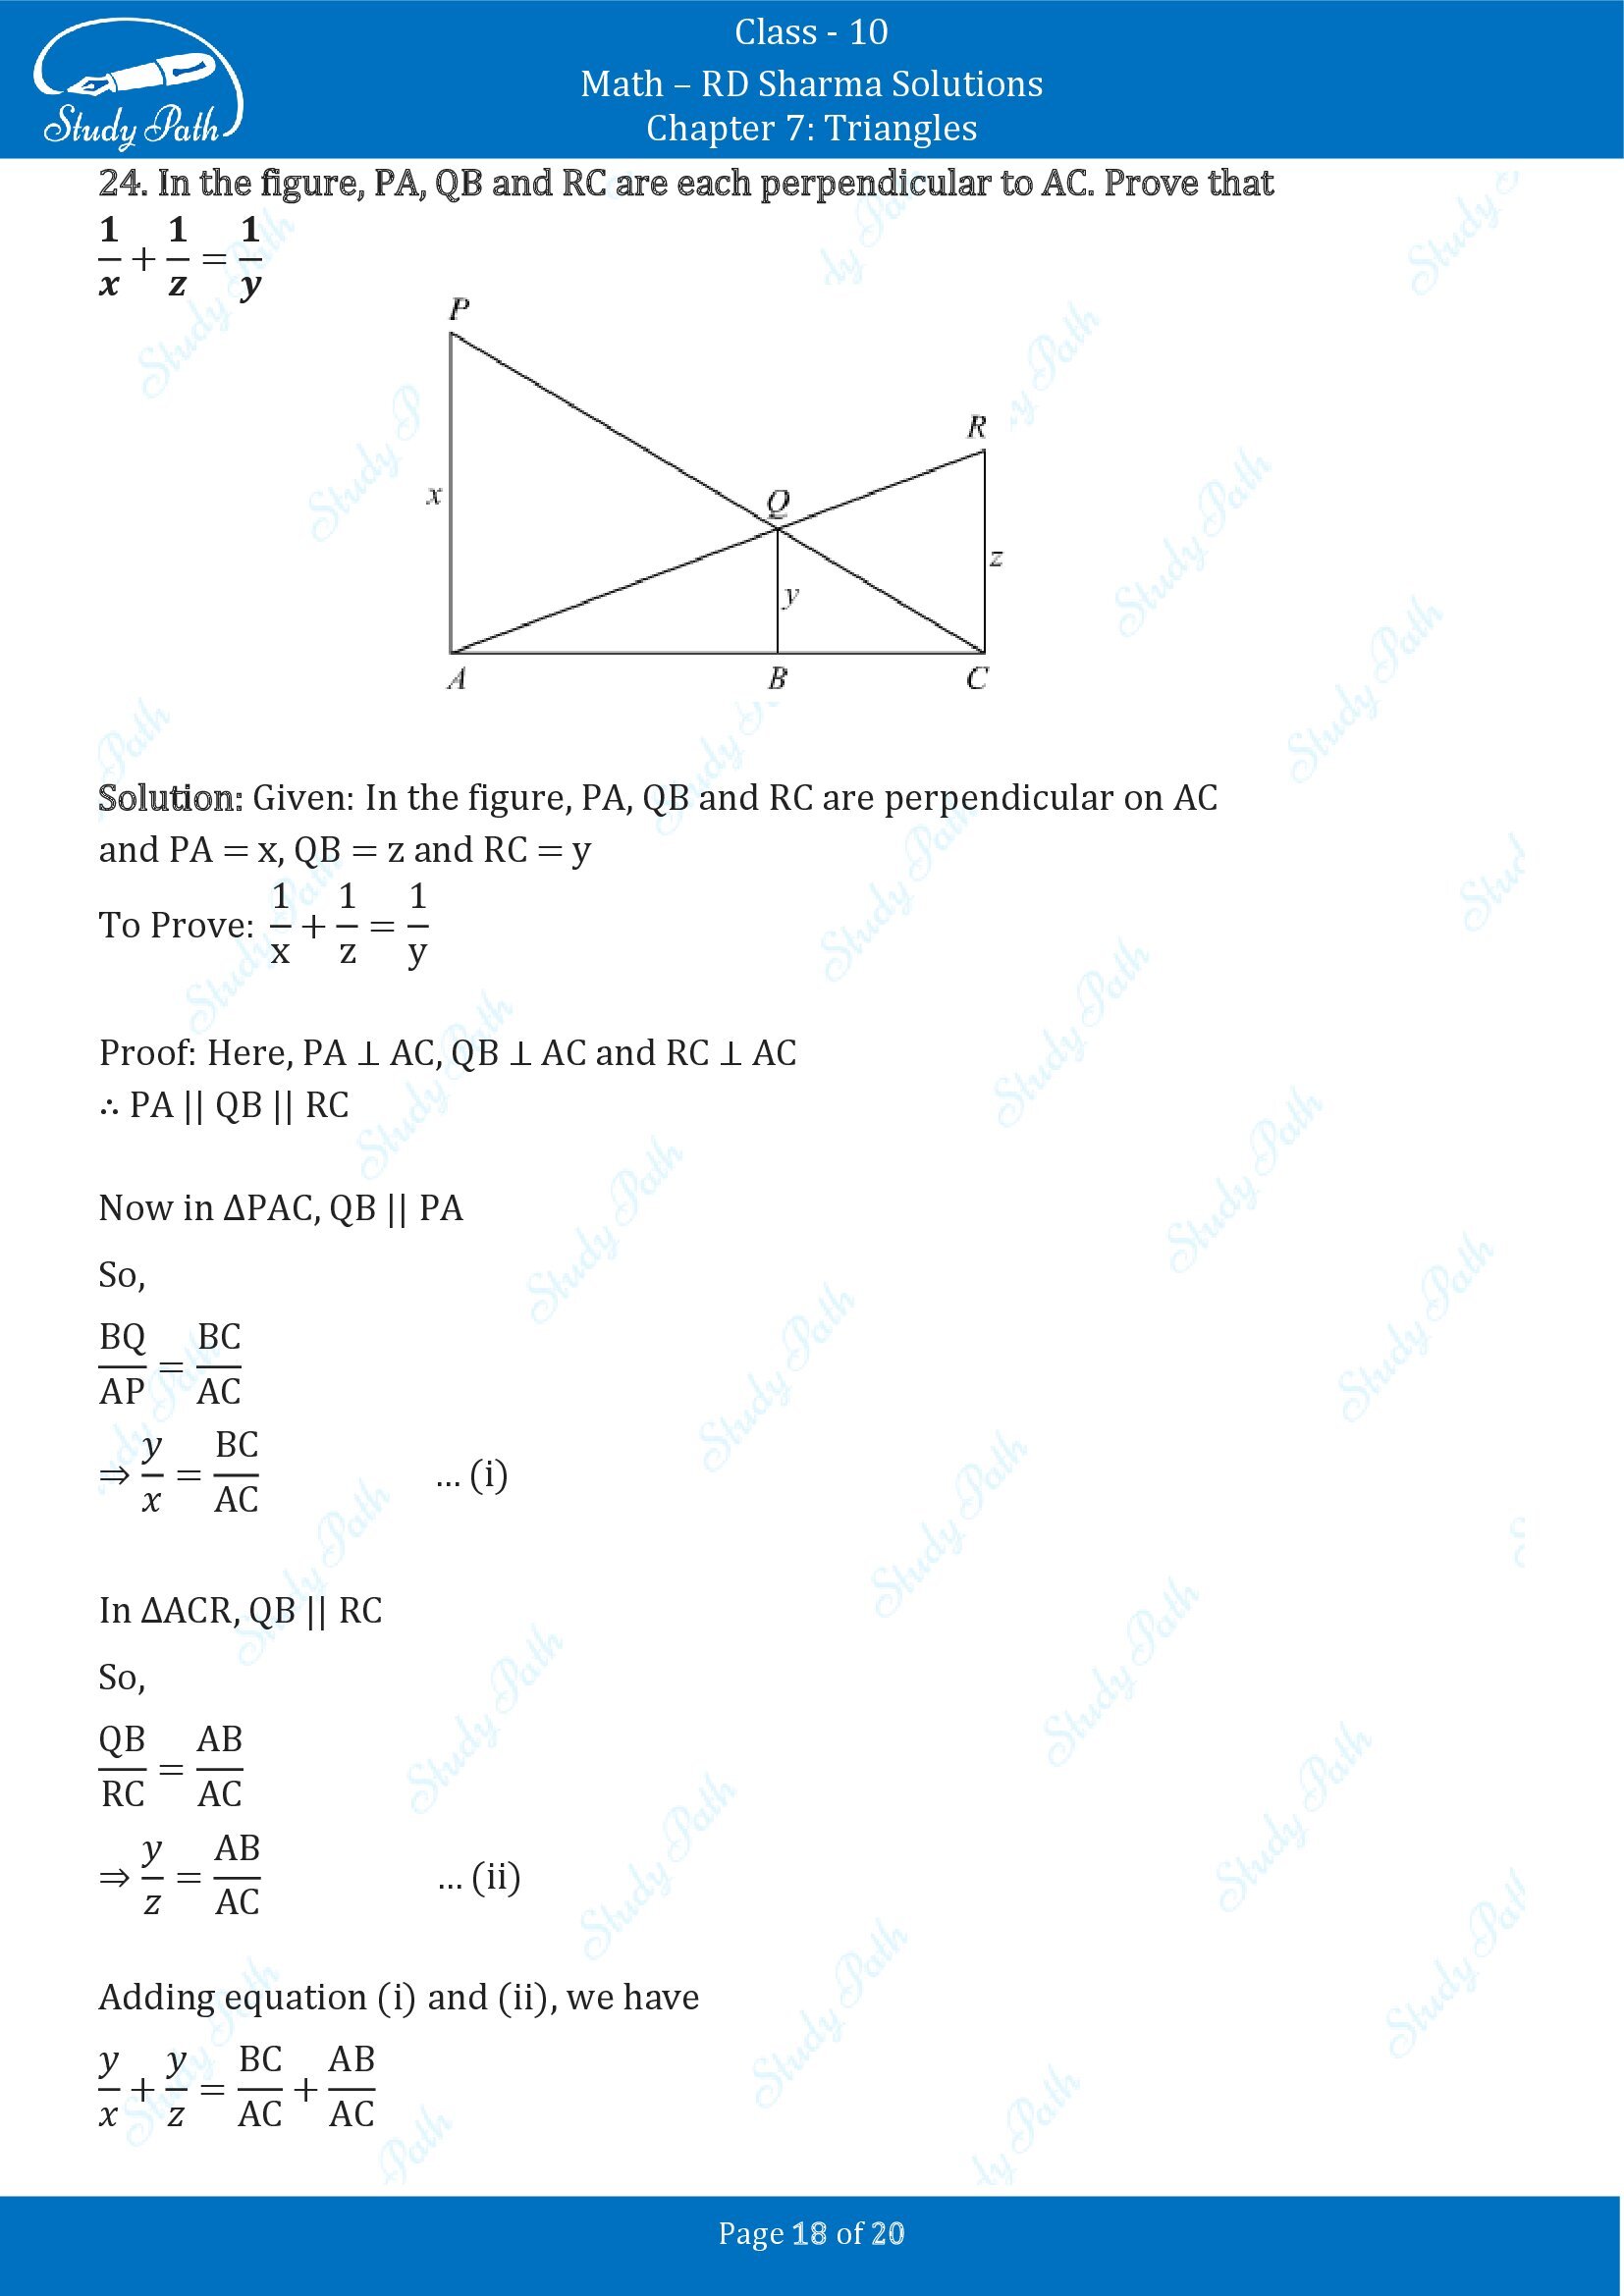 RD Sharma Solutions Class 10 Chapter 7 Triangles Exercise 7.5 00018